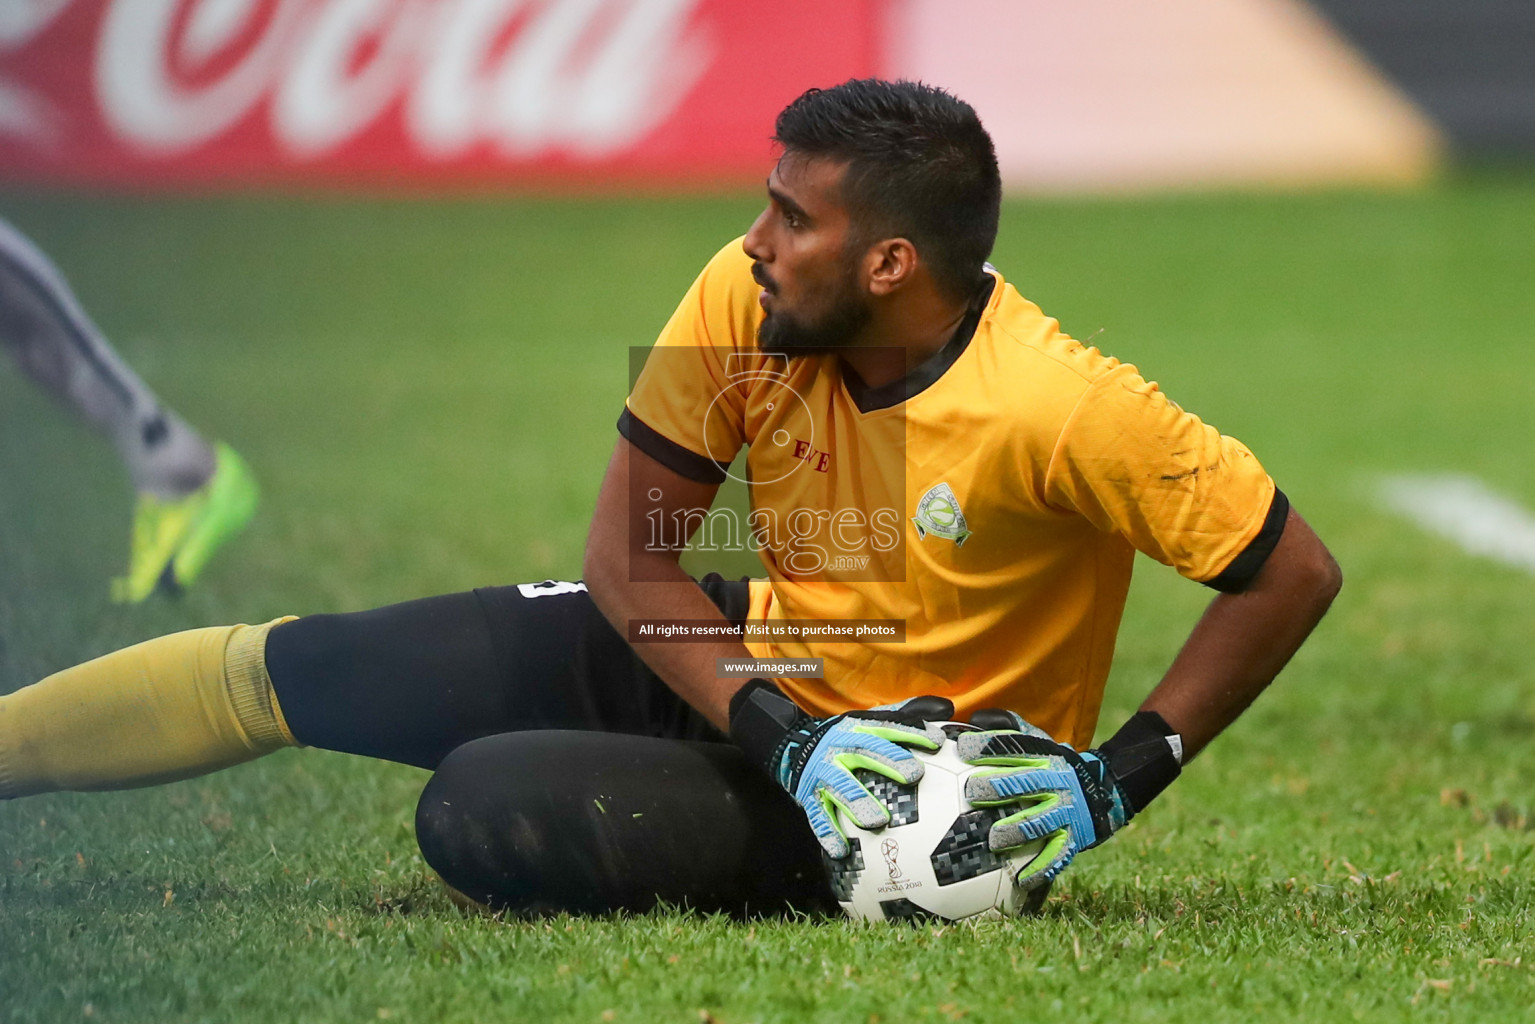 Green Streets vs United Victory in Dhiraagu Dhivehi Premier League 2019, in Male' Maldives on 23rd Sep 2019. Photos:Suadh Abdul Sattar / images.mv